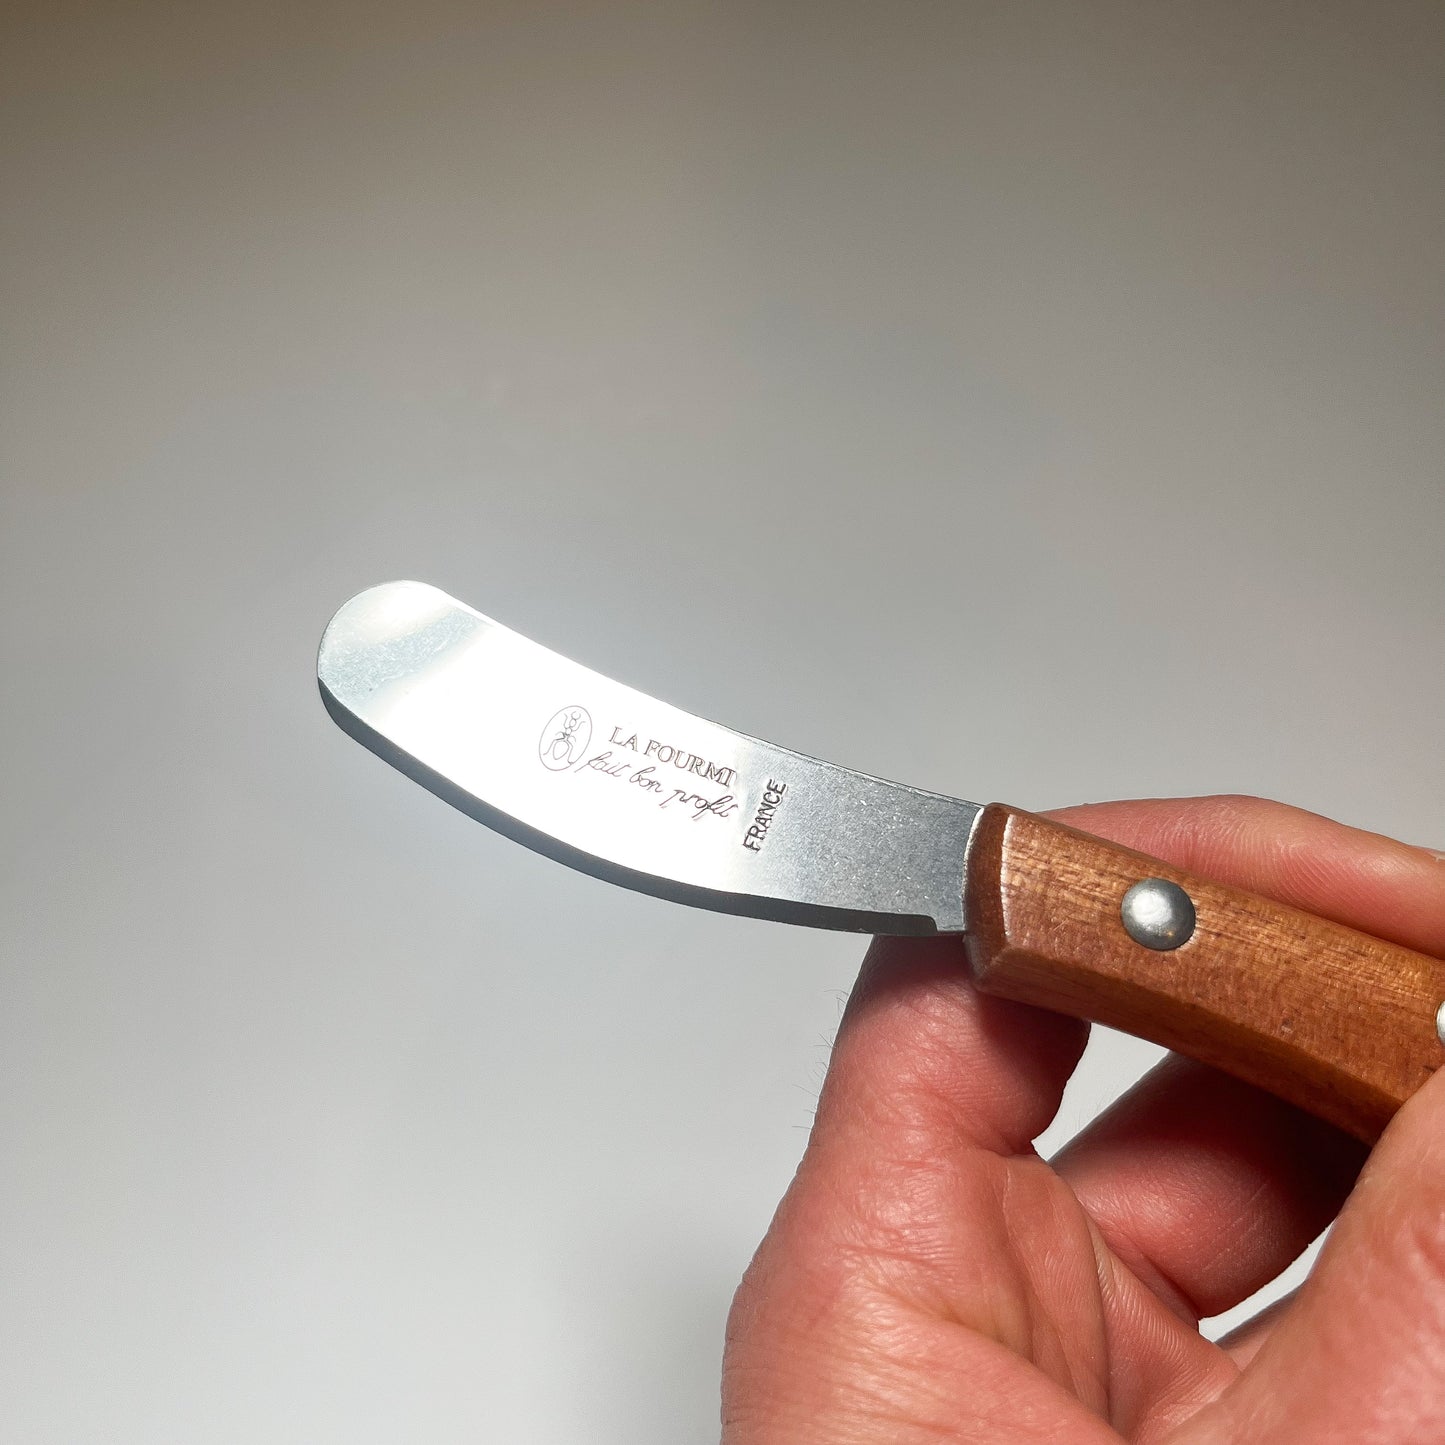 La Fourmi Canada Butter Knife, Made in France, Clementine Boutique